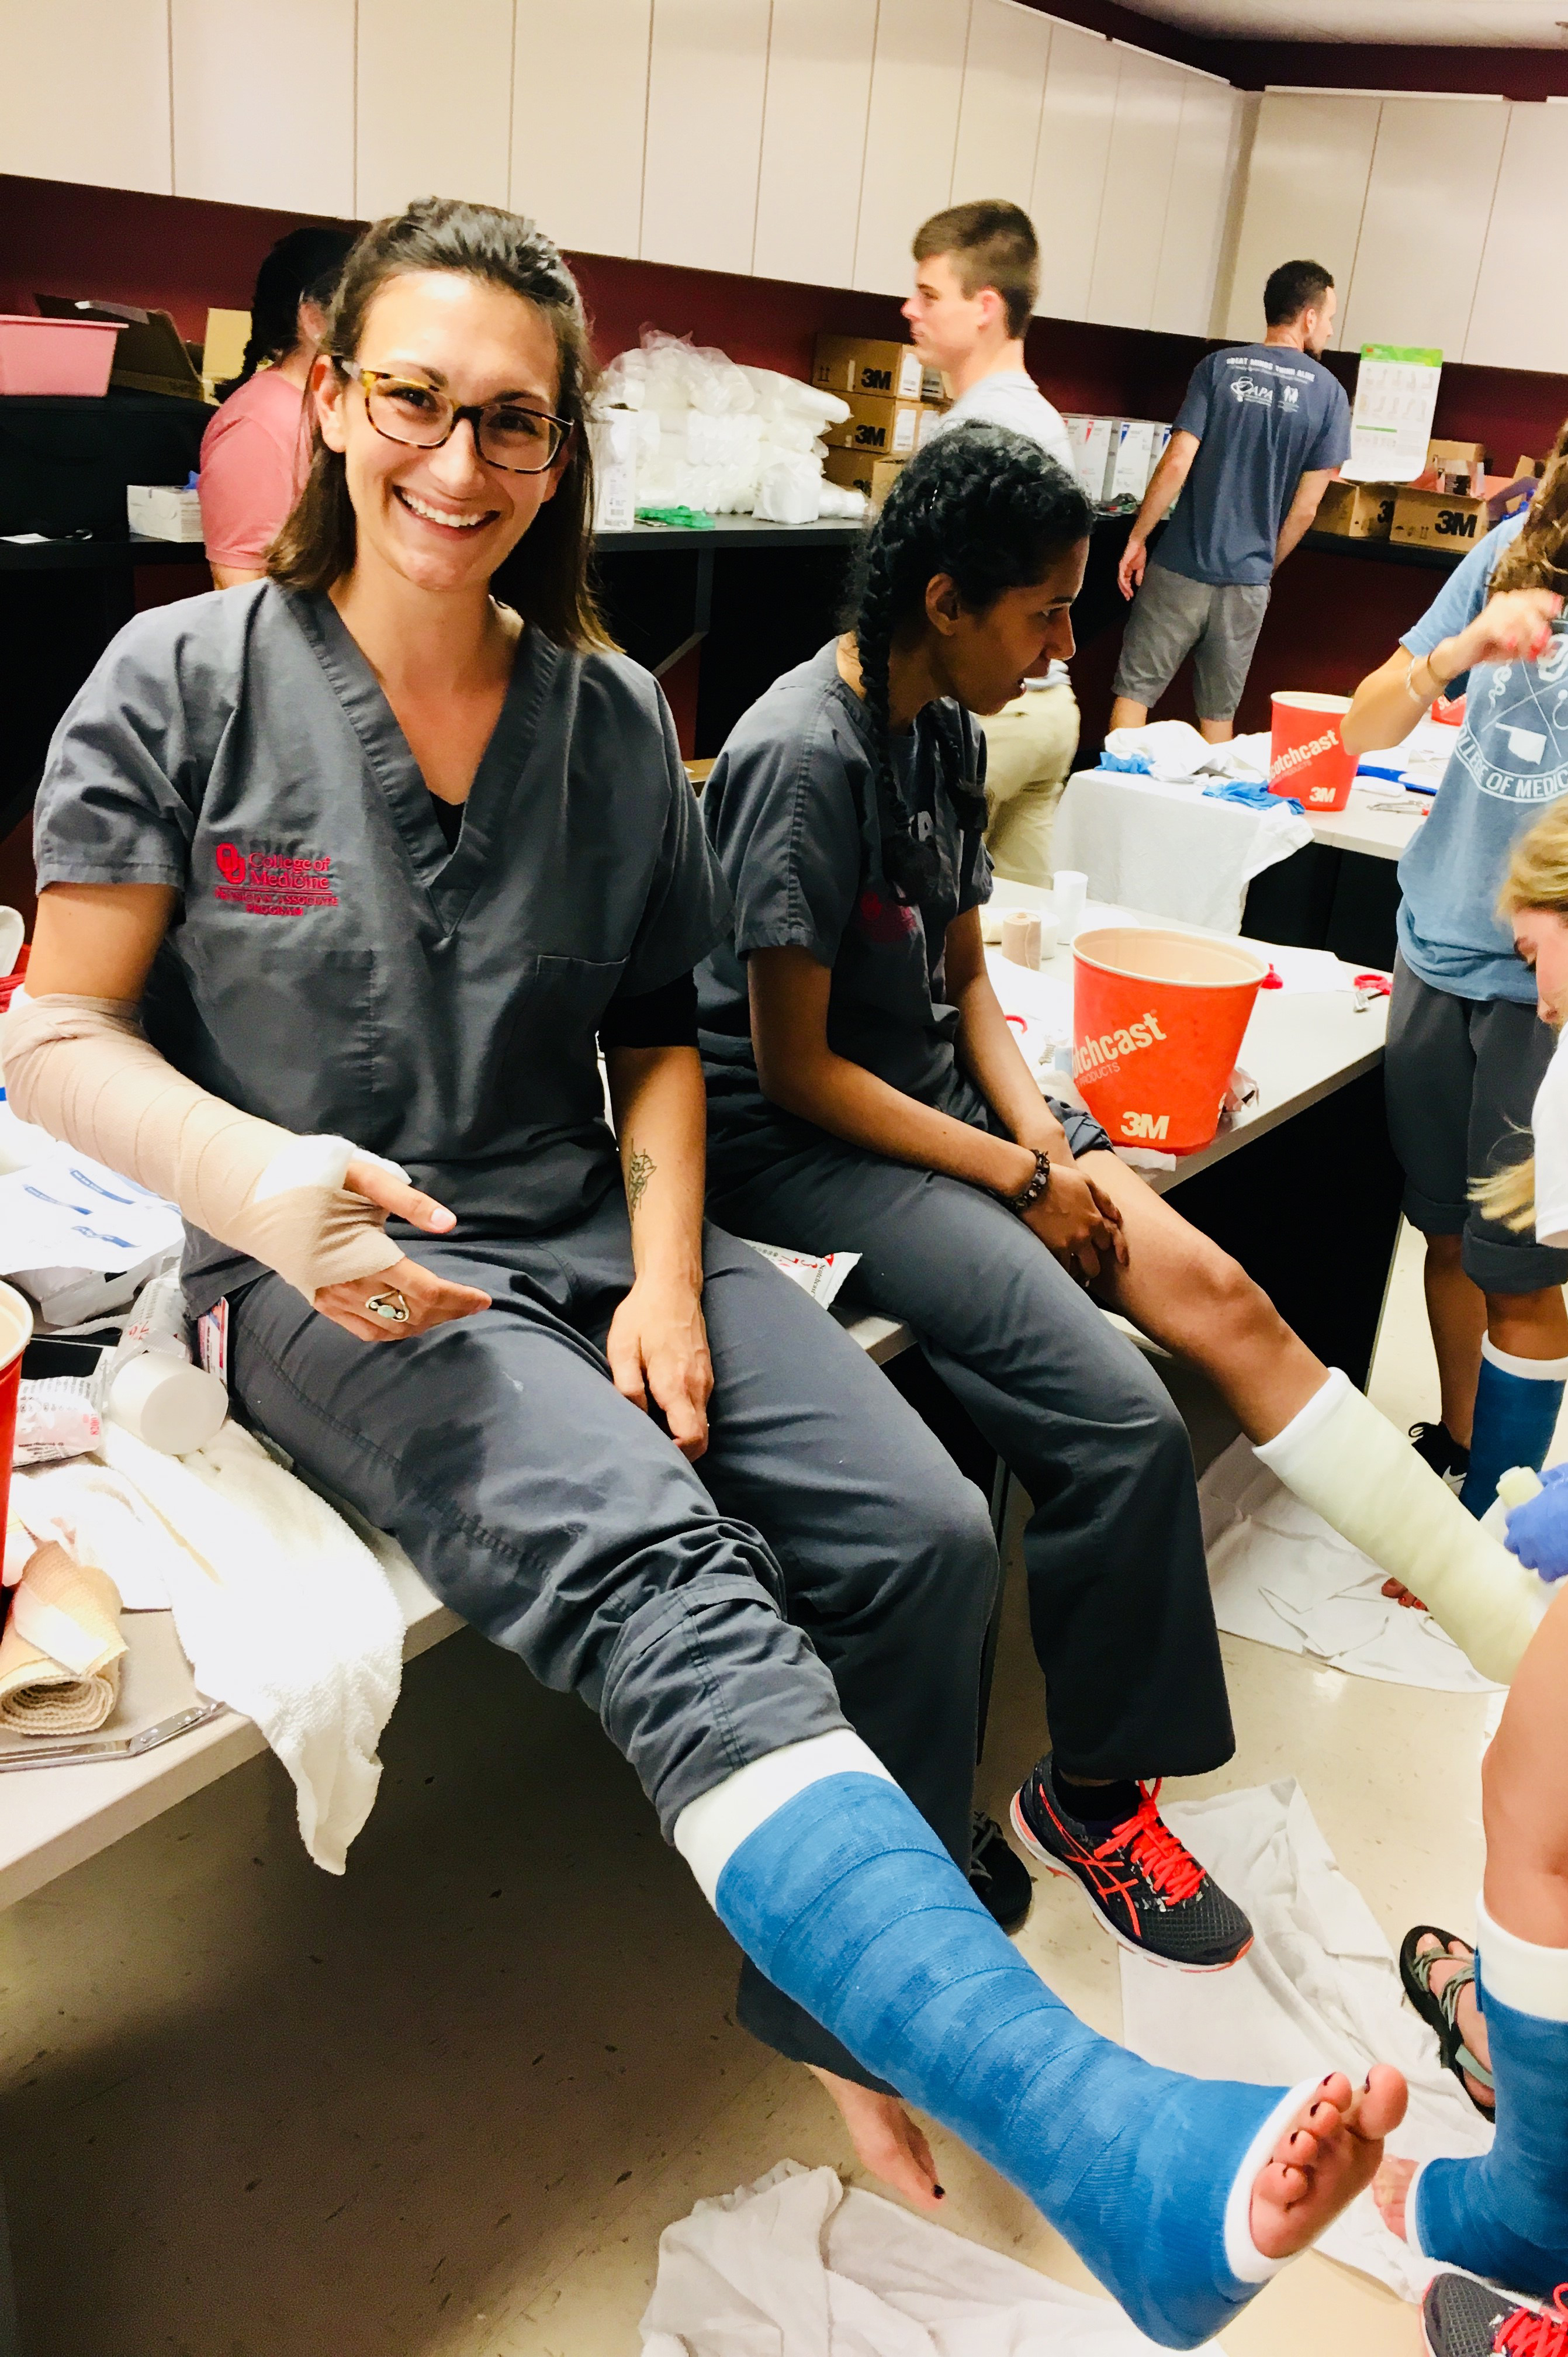 Julie Torres wears casts on her leg and arm